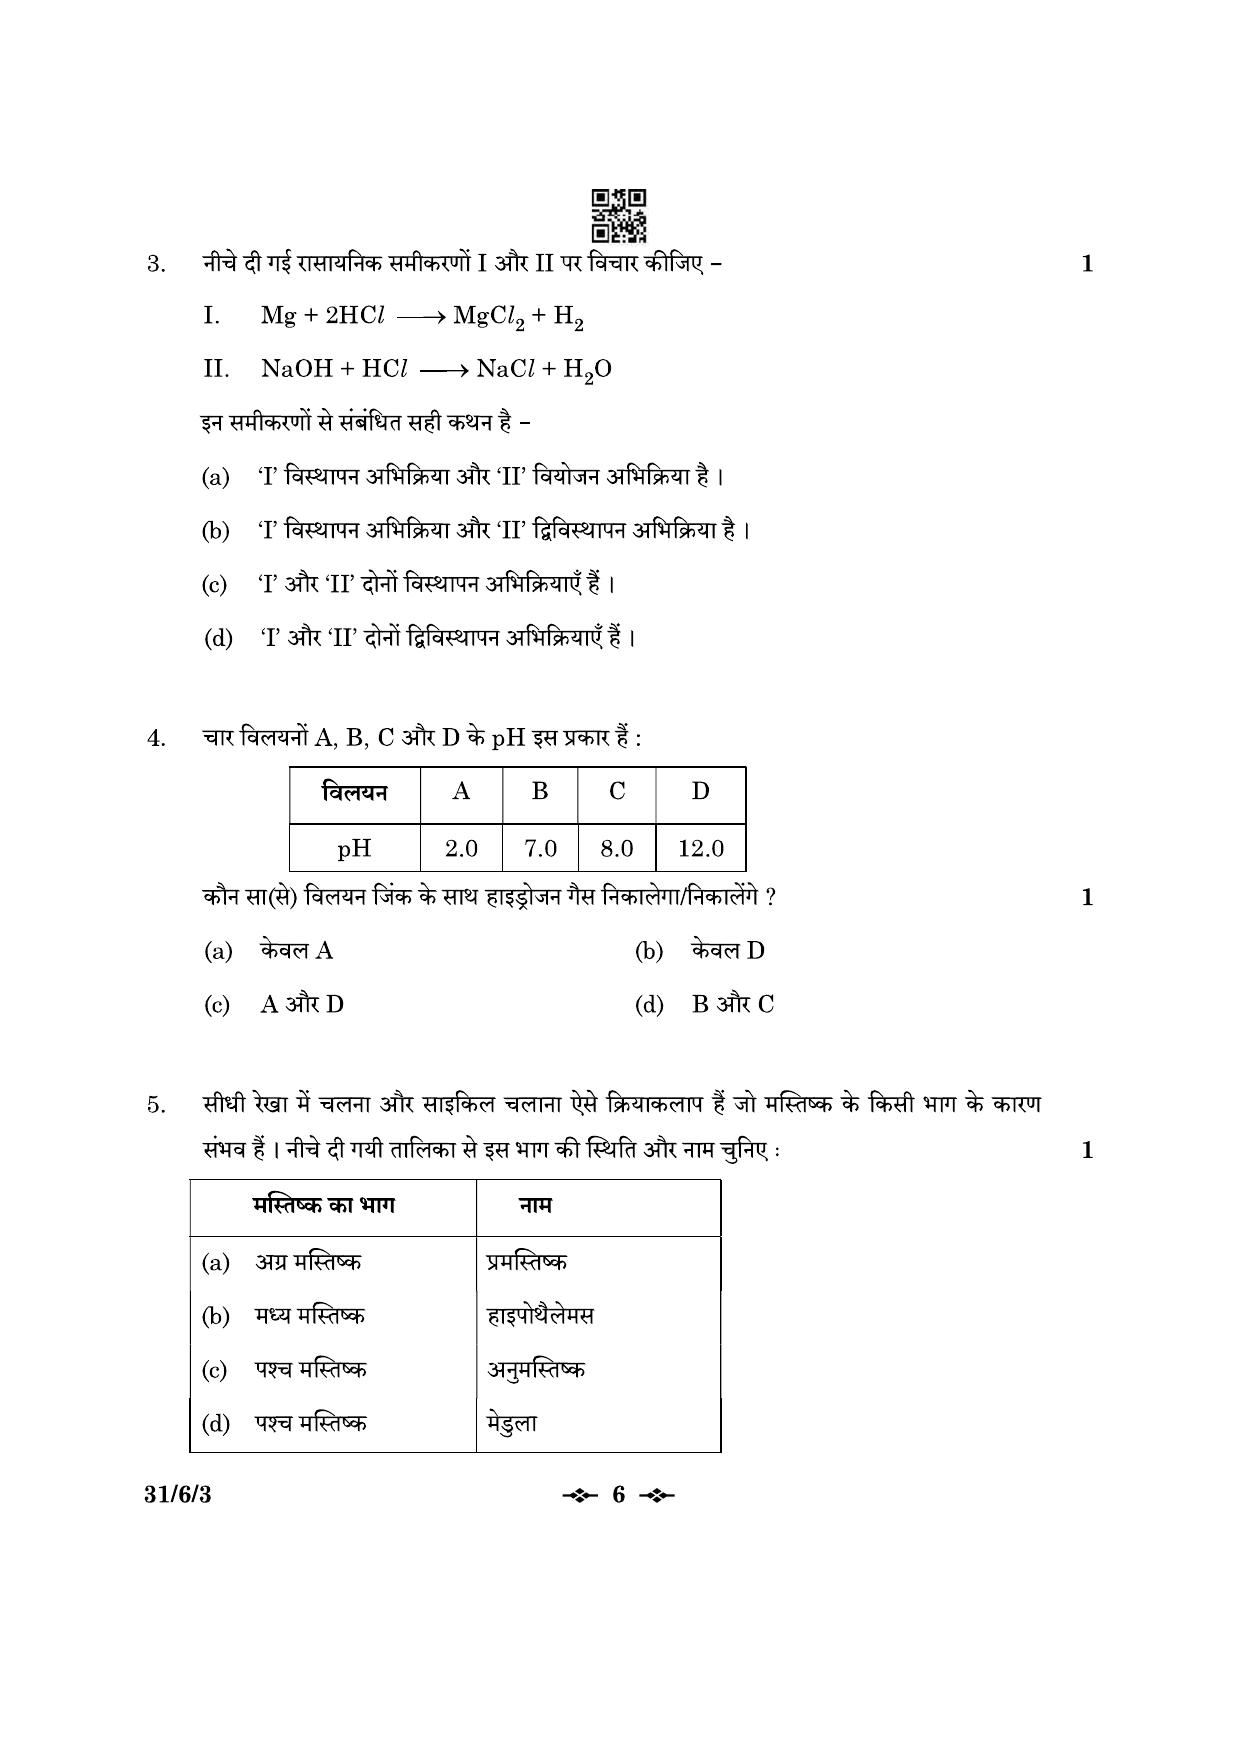 CBSE Class 10 31-6-3 Science 2023 Question Paper - Page 6